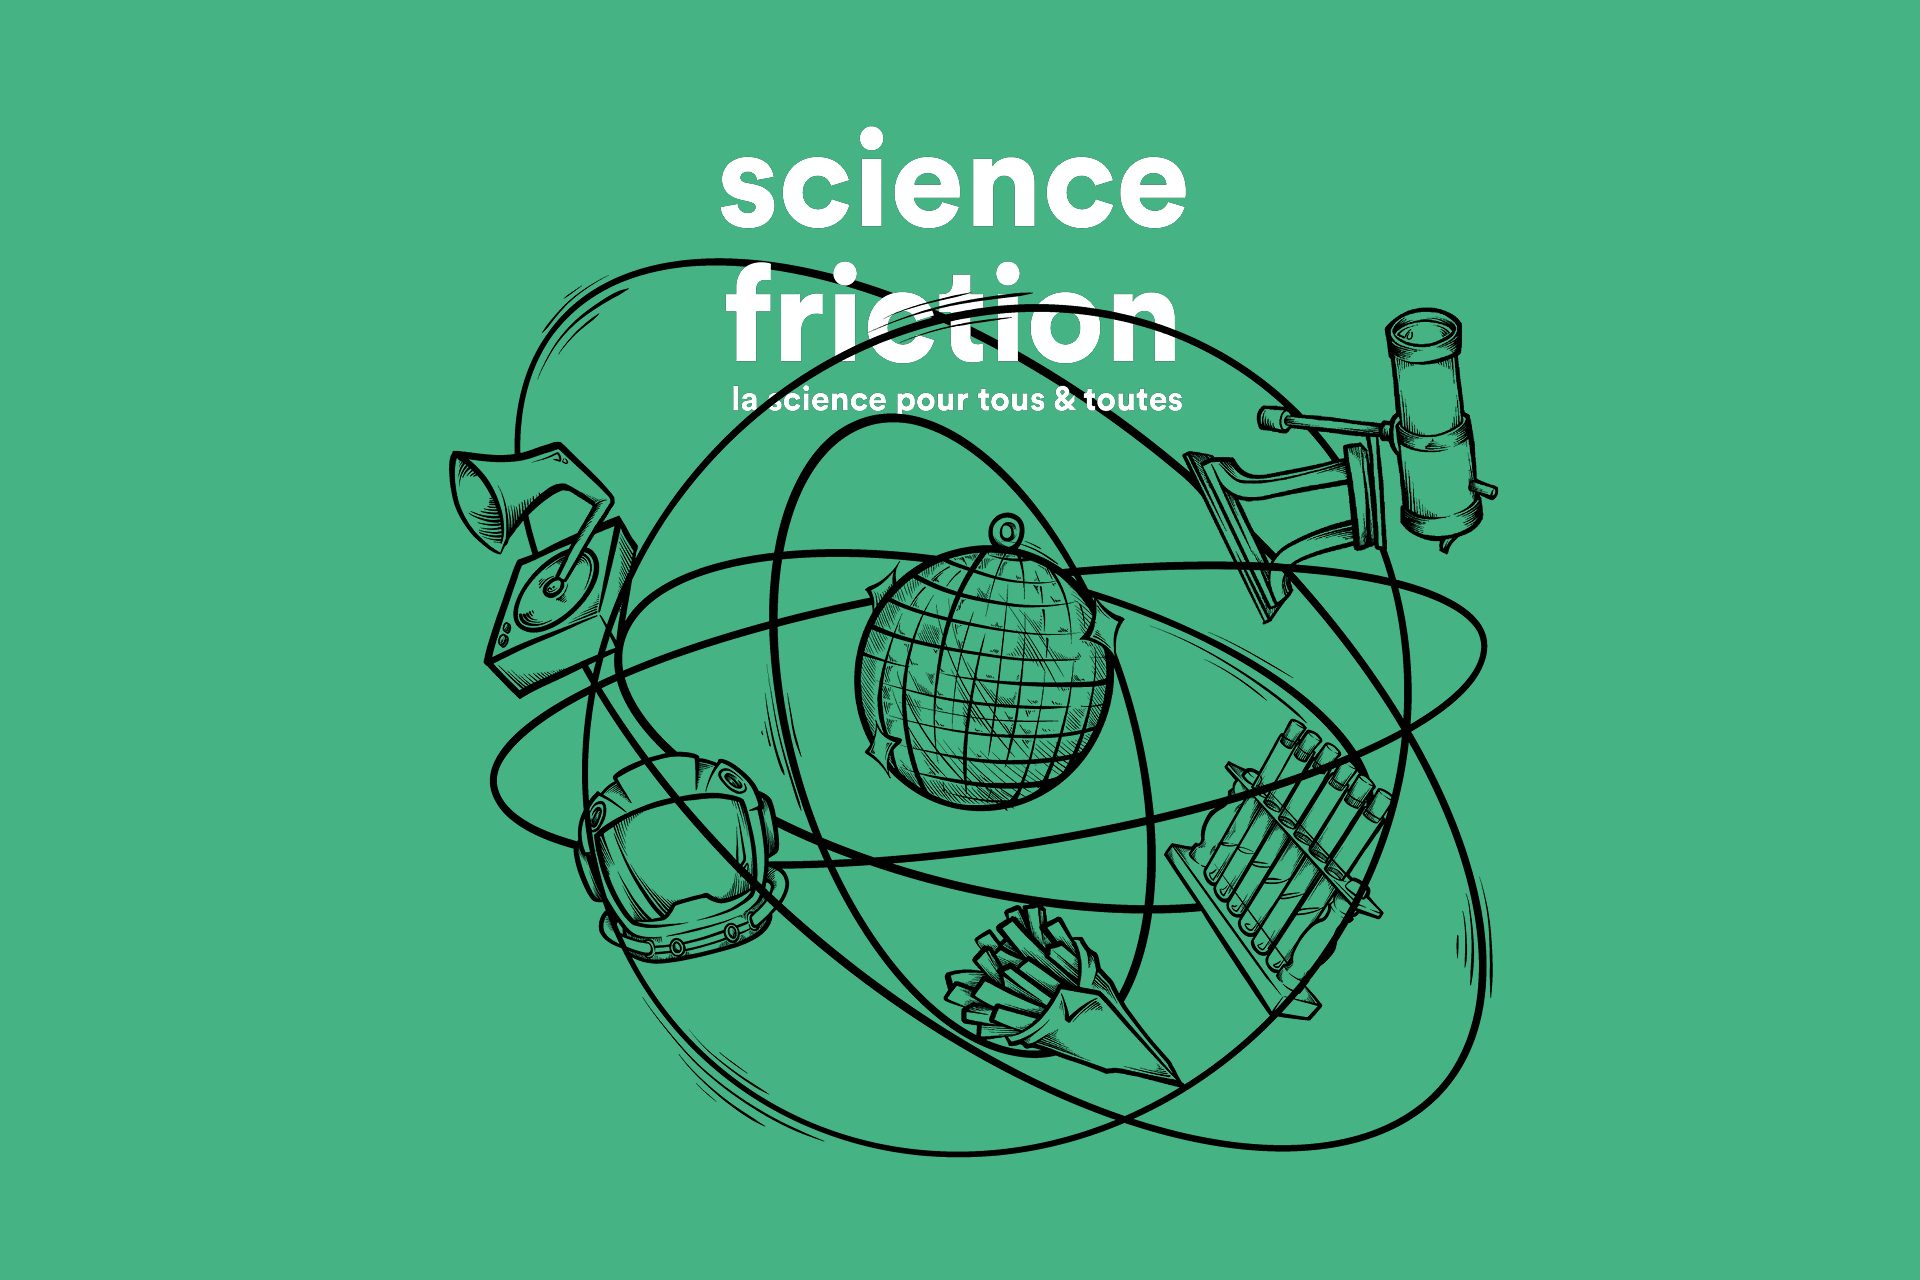 science-friction